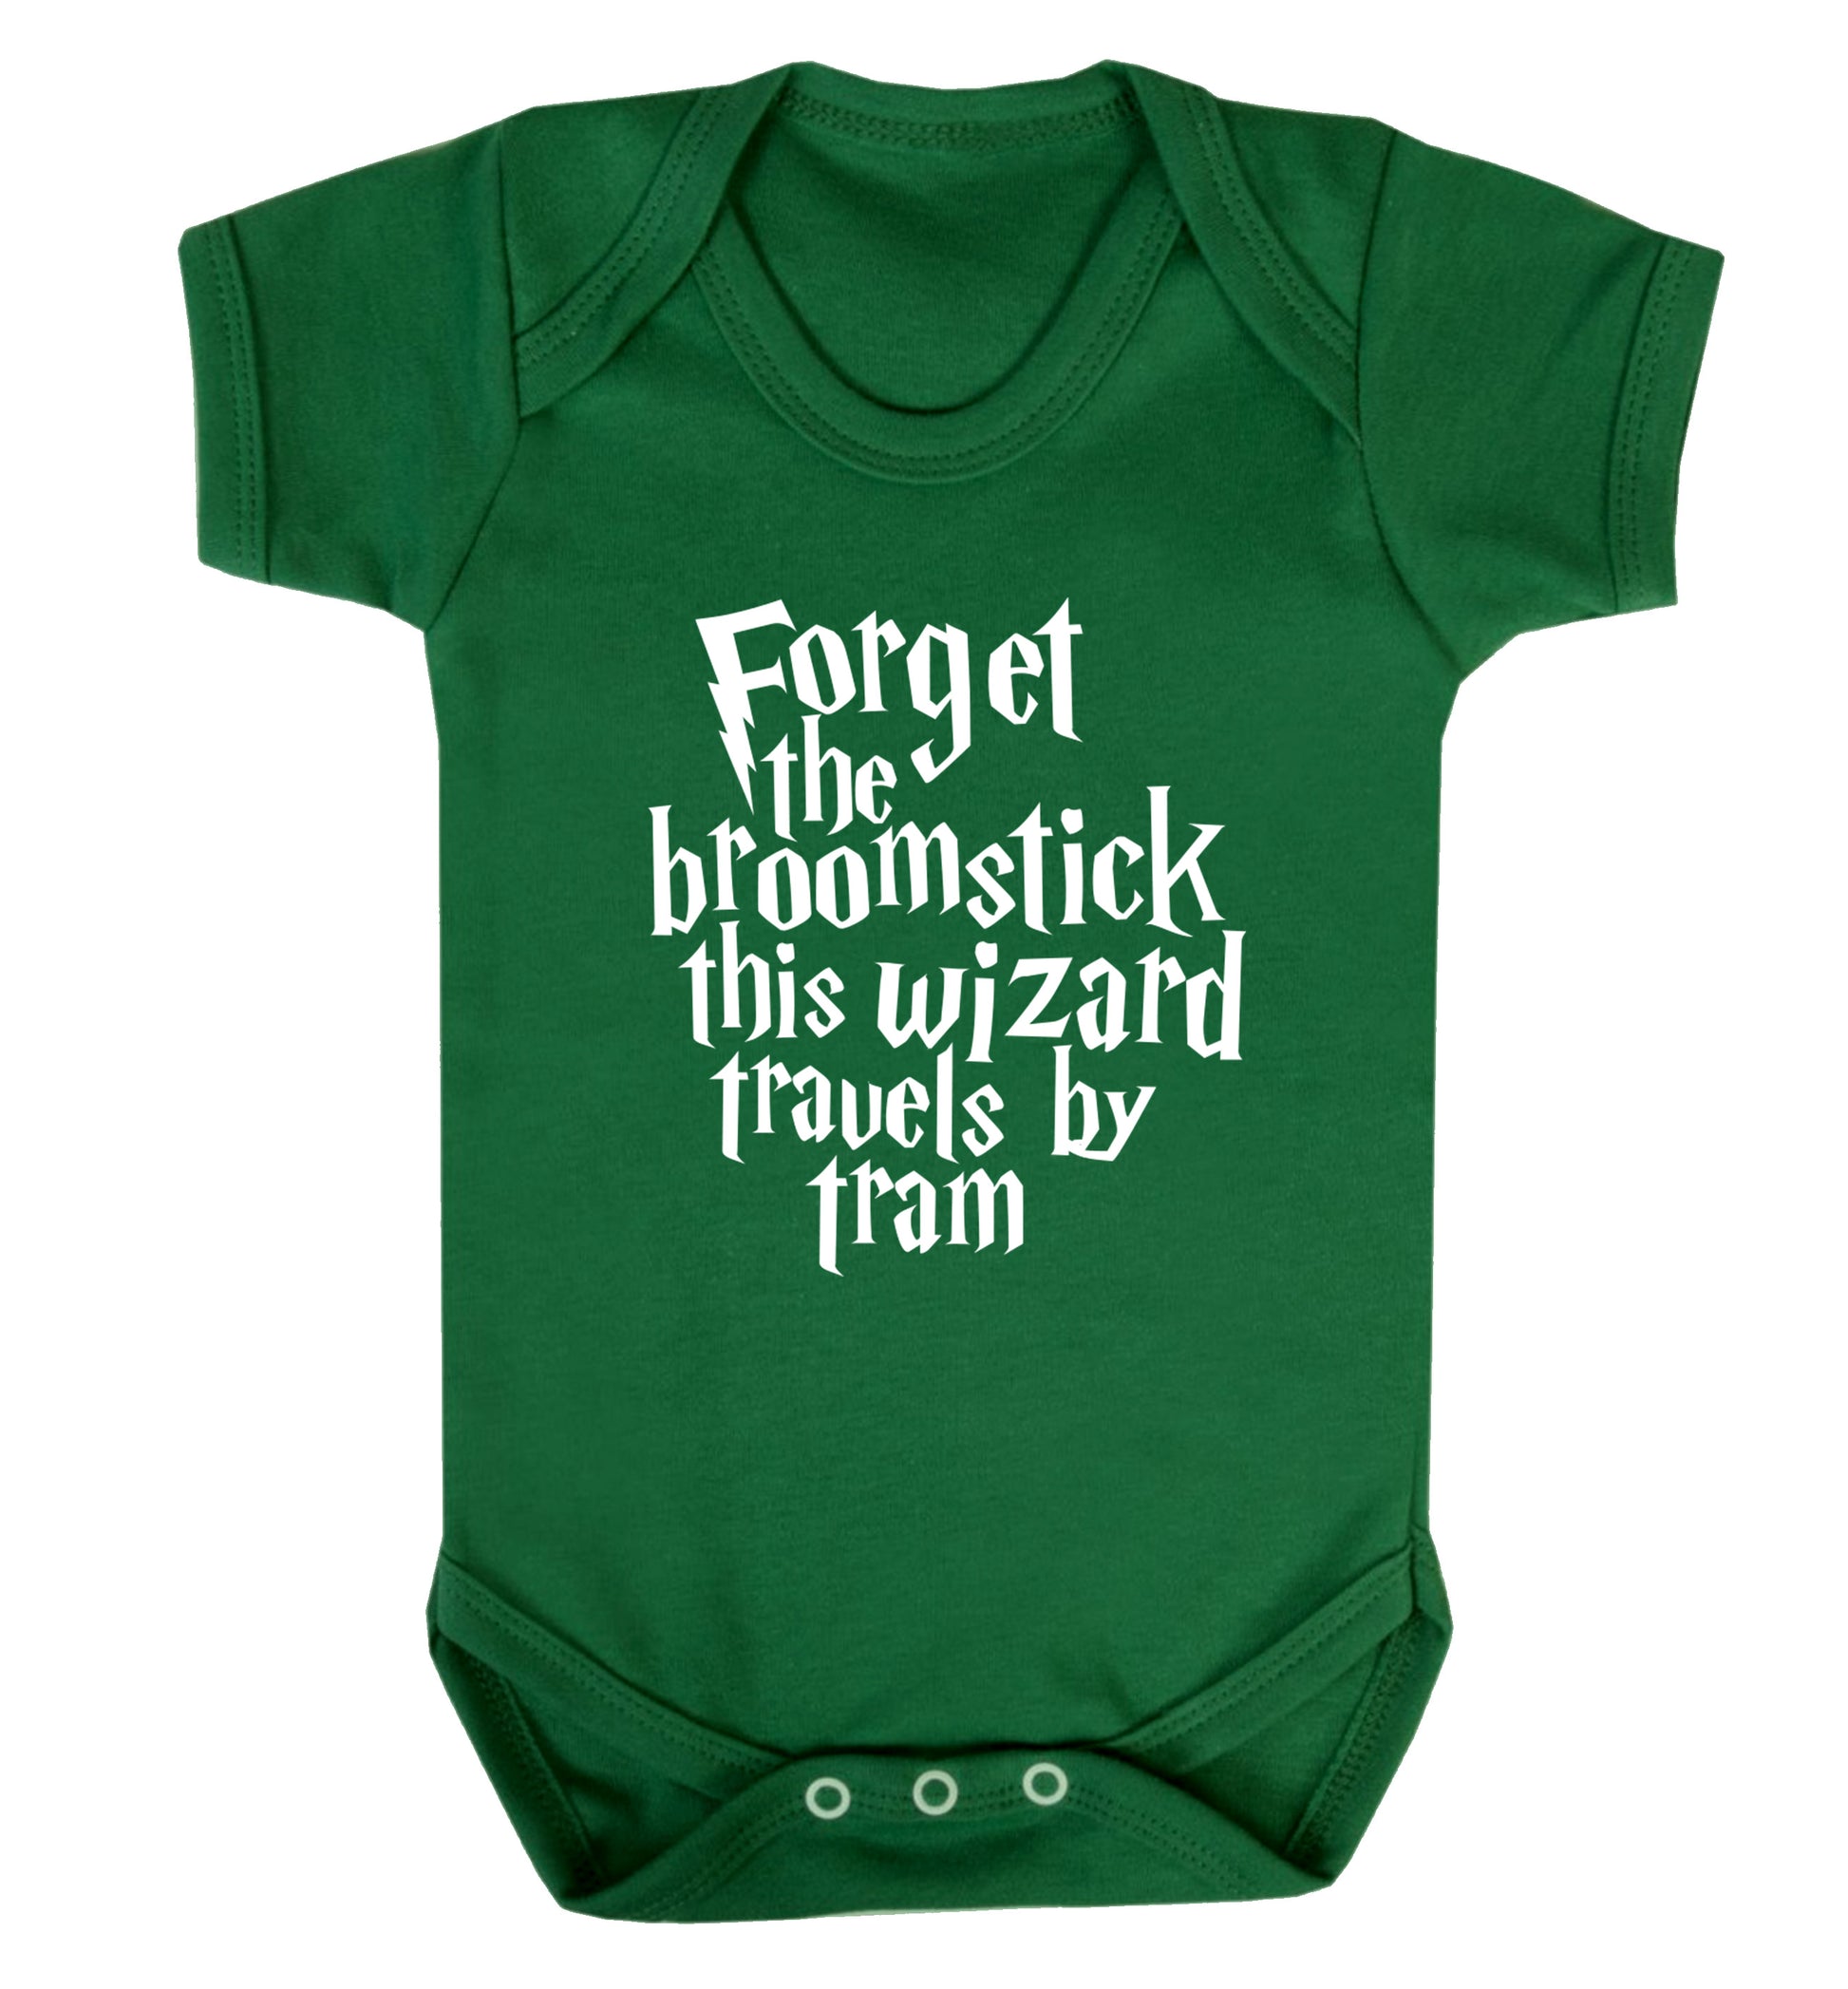 Forget the broomstick this wizard travels by tram Baby Vest green 18-24 months